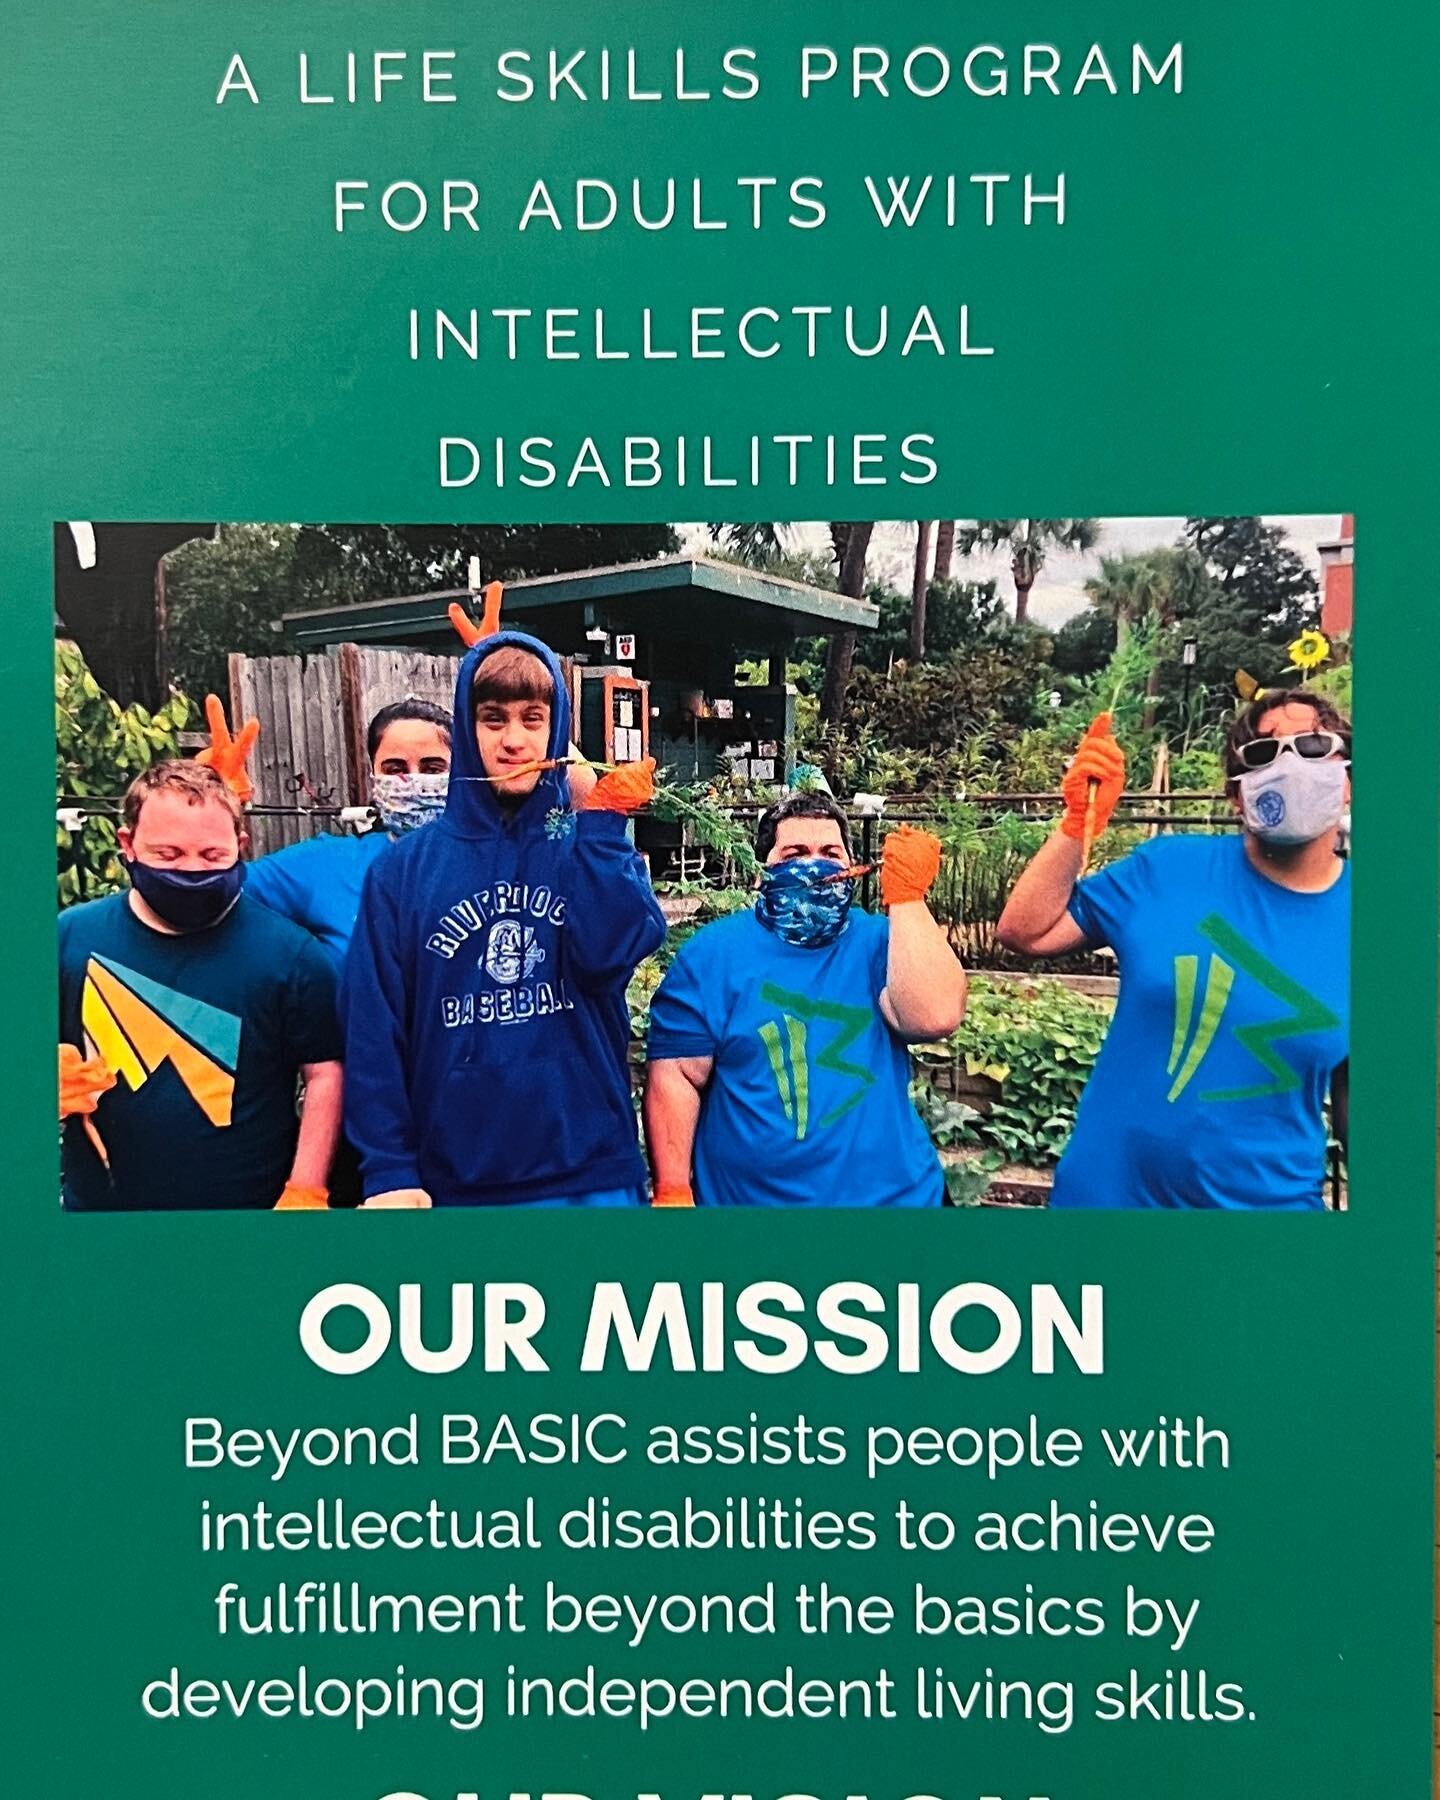 Today Peter&rsquo;s Pit Stop will take a break from our usual post to feature a visit we had yesterday with an organization called Beyond Basic. They assist people with intellectual disabilities to achieve fulfillment beyond the basics by developing 